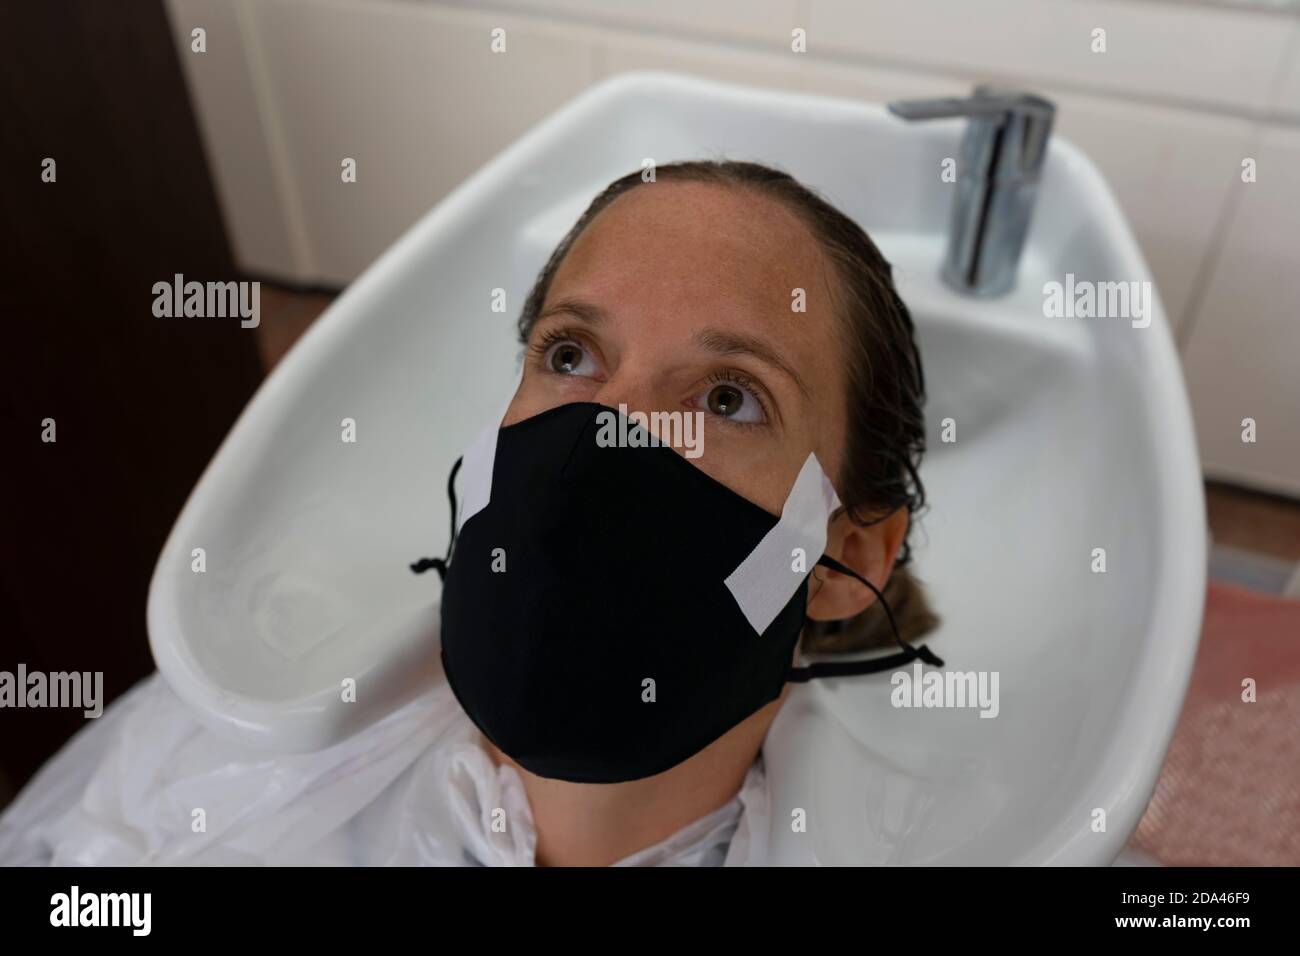 Woman wearing medical protective mask at hairdressing salon.Customers , workers and business measures against coronavirus concept, new normal pandemic Stock Photo